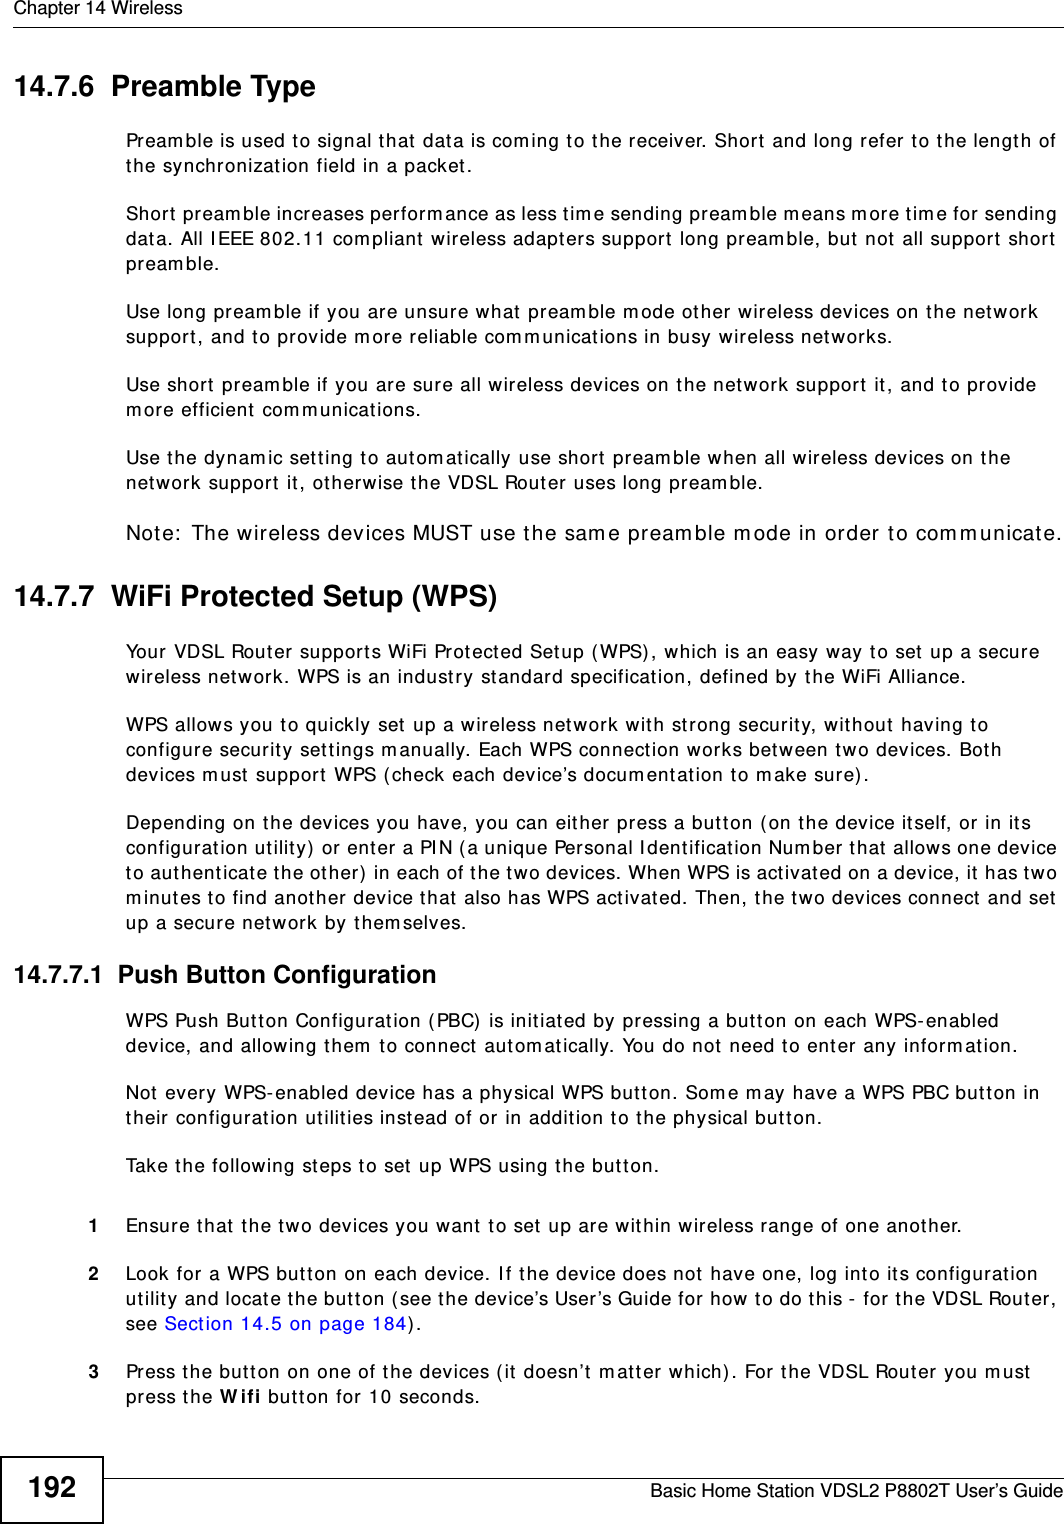 Chapter 14 WirelessBasic Home Station VDSL2 P8802T User’s Guide19214.7.6  Preamble TypePream ble is used t o signal that data is com ing t o the receiver. Short  and long refer t o the length of the synchronization field in a packet .Short pr eam ble increases perform ance as less tim e sending pream ble m eans m ore tim e for sending dat a. All I EEE 802.11 com pliant wir eless adapt ers support  long pream ble, but  not  all support  short pream ble. Use long pream ble if you are unsure what  pream ble m ode other wireless devices on t he net work support, and t o provide m ore reliable com m unicat ions in busy wireless net works. Use short pream ble if you are sure all wireless devices on t he net work support  it , and t o provide m ore efficient com m unicat ions.Use t he dynam ic set t ing t o autom at ically use shor t pream ble when all wireless devices on t he net work support  it , other wise t he VDSL Router uses long pream ble.Note:  The wireless devices MUST use t he sam e pream ble m ode in order to com municate.14.7.7  WiFi Protected Setup (WPS)Your VDSL Router support s WiFi Protected Set up (WPS) , which is an easy way to set  up a secure wireless net work. WPS is an indust ry standard specification, defined by the WiFi Alliance.WPS allows you to quickly set  up a wireless net work with st rong security, wit hout having to configure security set t ings m anually. Each WPS connect ion works bet ween two devices. Both devices m ust  support  WPS ( check each device’s docum entation t o m ake sure). Depending on the devices you have, you can either press a butt on (on the device it self, or  in its configurat ion utility) or ent er a PI N ( a unique Personal I dentificat ion Num ber that allow s one device to aut hent icat e t he other)  in each of t he t wo devices. When WPS is act ivated on a device, it  has t wo m inutes to find another device t hat  also has WPS act ivated. Then, the t wo devices connect and set  up a secure network by them selves.14.7.7.1  Push Button ConfigurationWPS Push But ton Configurat ion (PBC) is init iated by pressing a but ton on each WPS- enabled device, and allowing t hem  to connect autom at ically. You do not need t o ent er any inform at ion. Not every WPS- enabled device has a physical WPS butt on. Som e m ay have a WPS PBC button in their configuration utilities inst ead of or in addition t o the physical butt on.Take t he following steps t o set  up WPS using the butt on.1Ensure t hat t he t wo devices you want to set  up are within wireless range of one another. 2Look for a WPS but t on on each device. I f the device does not have one, log int o its configuration utility and locate the but ton ( see t he device’s User ’s Guide for how to do this -  for the VDSL Router , see Sect ion 14.5 on page 184) .3Press t he button on one of the devices ( it doesn’t m at t er which) . For the VDSL Router  you m ust  press the W ifi butt on for 10 seconds.